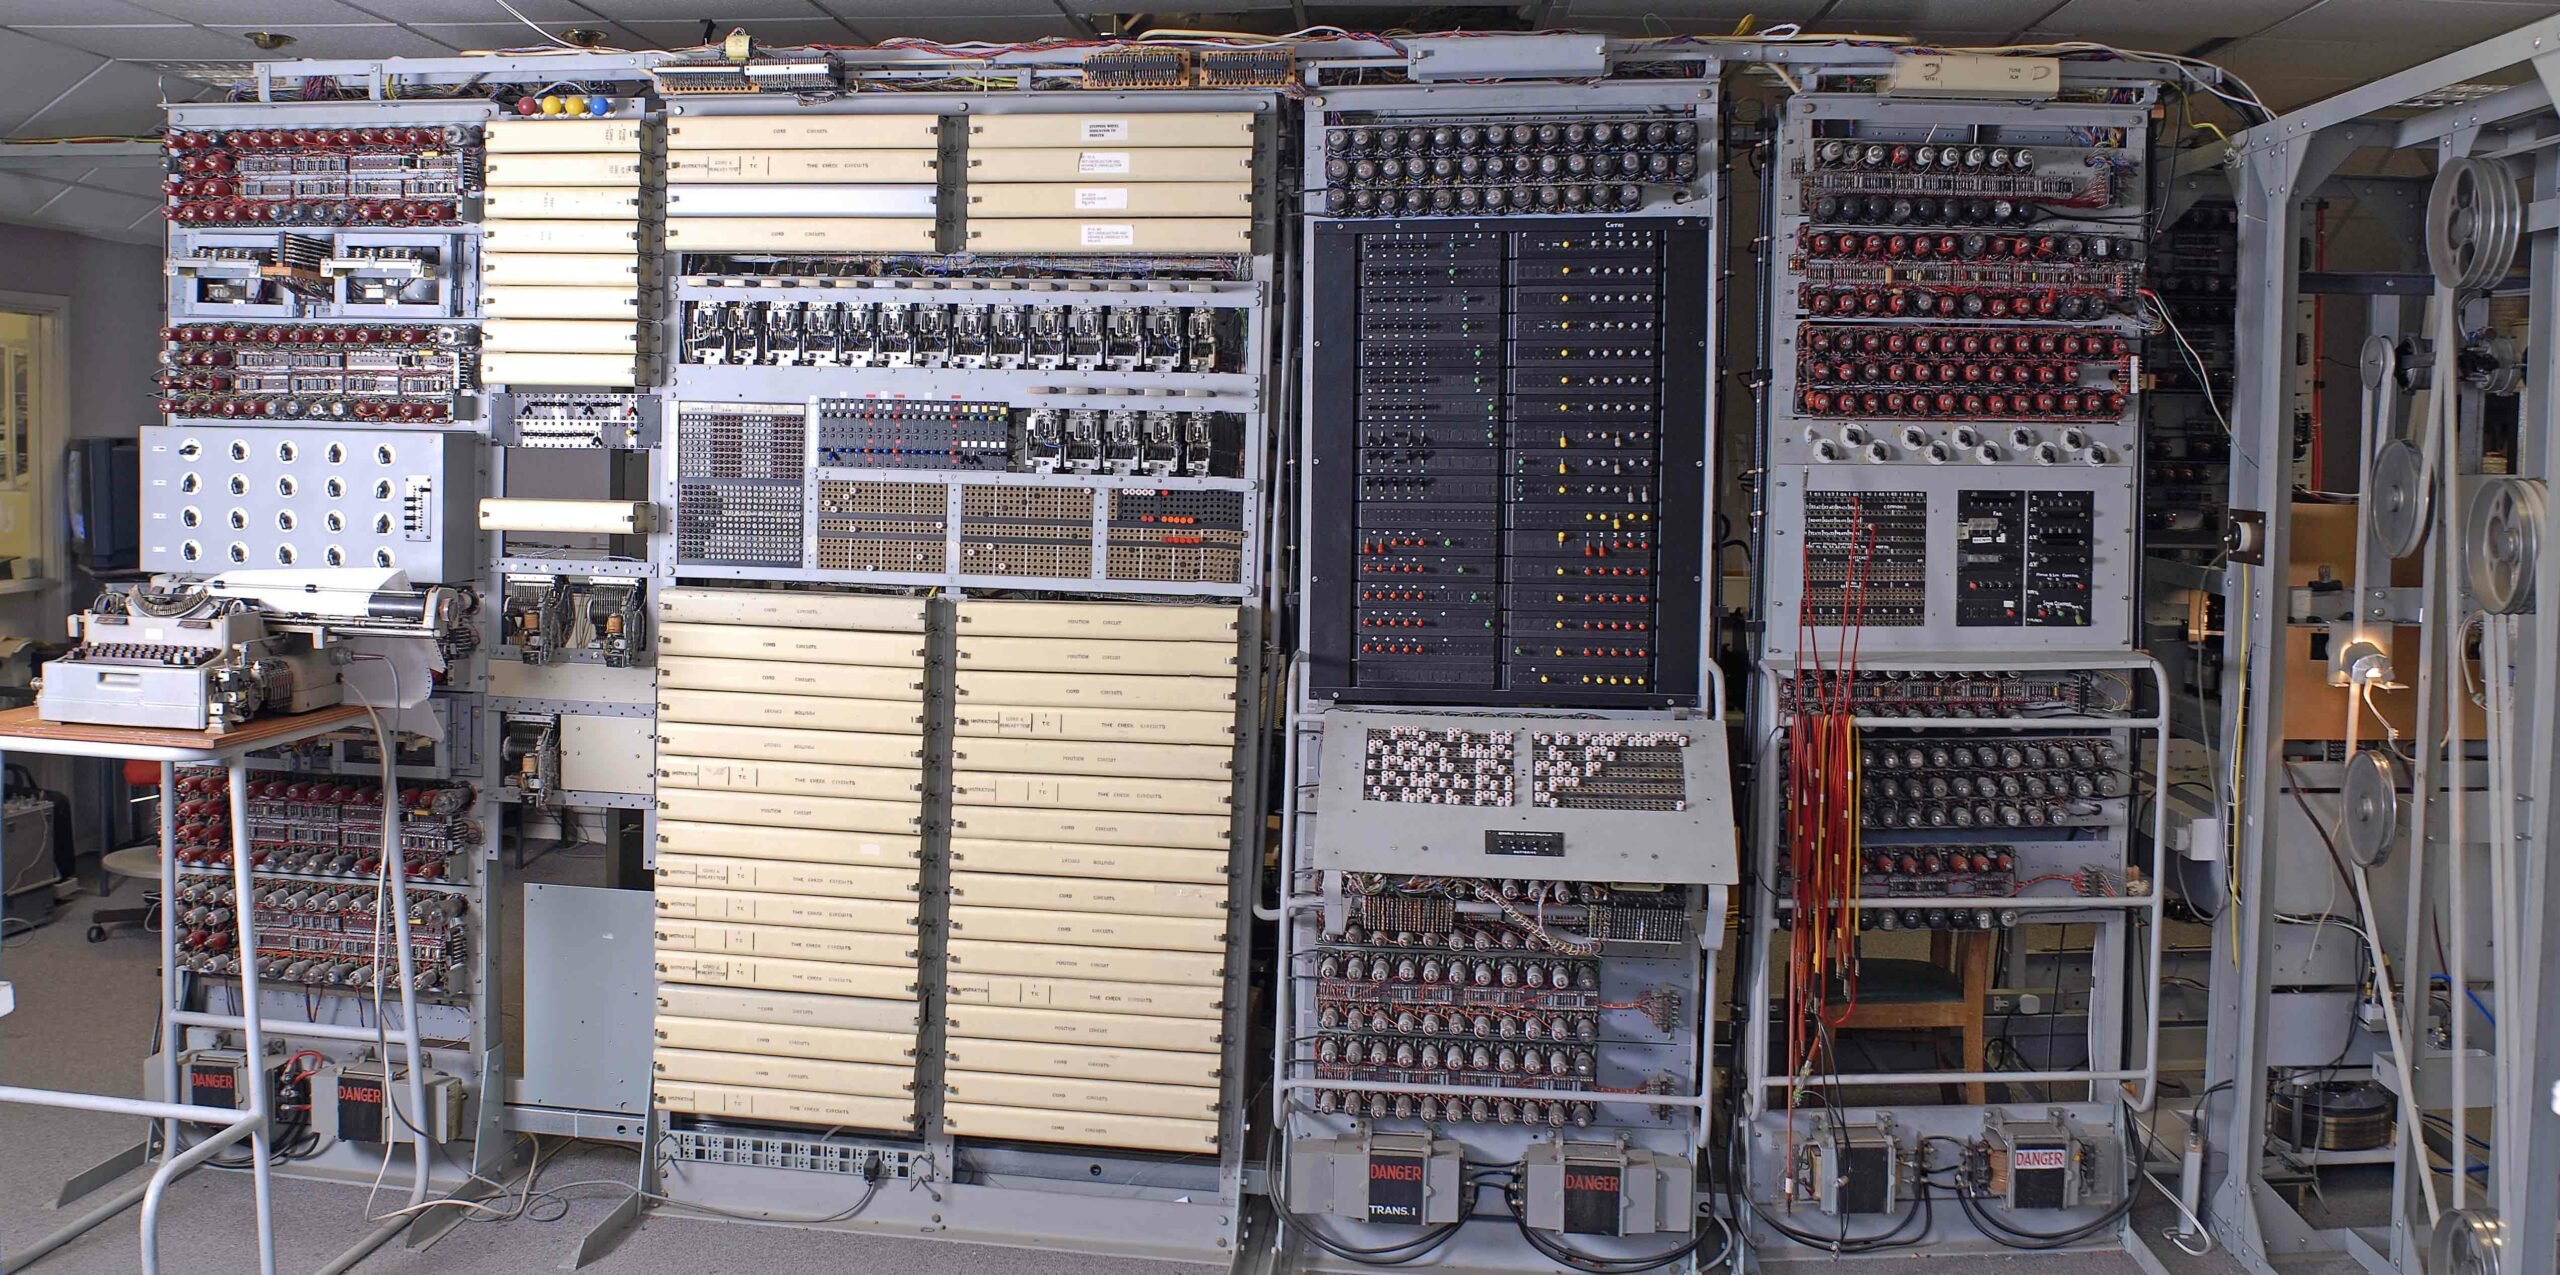 The National Museum of Computing Top Image